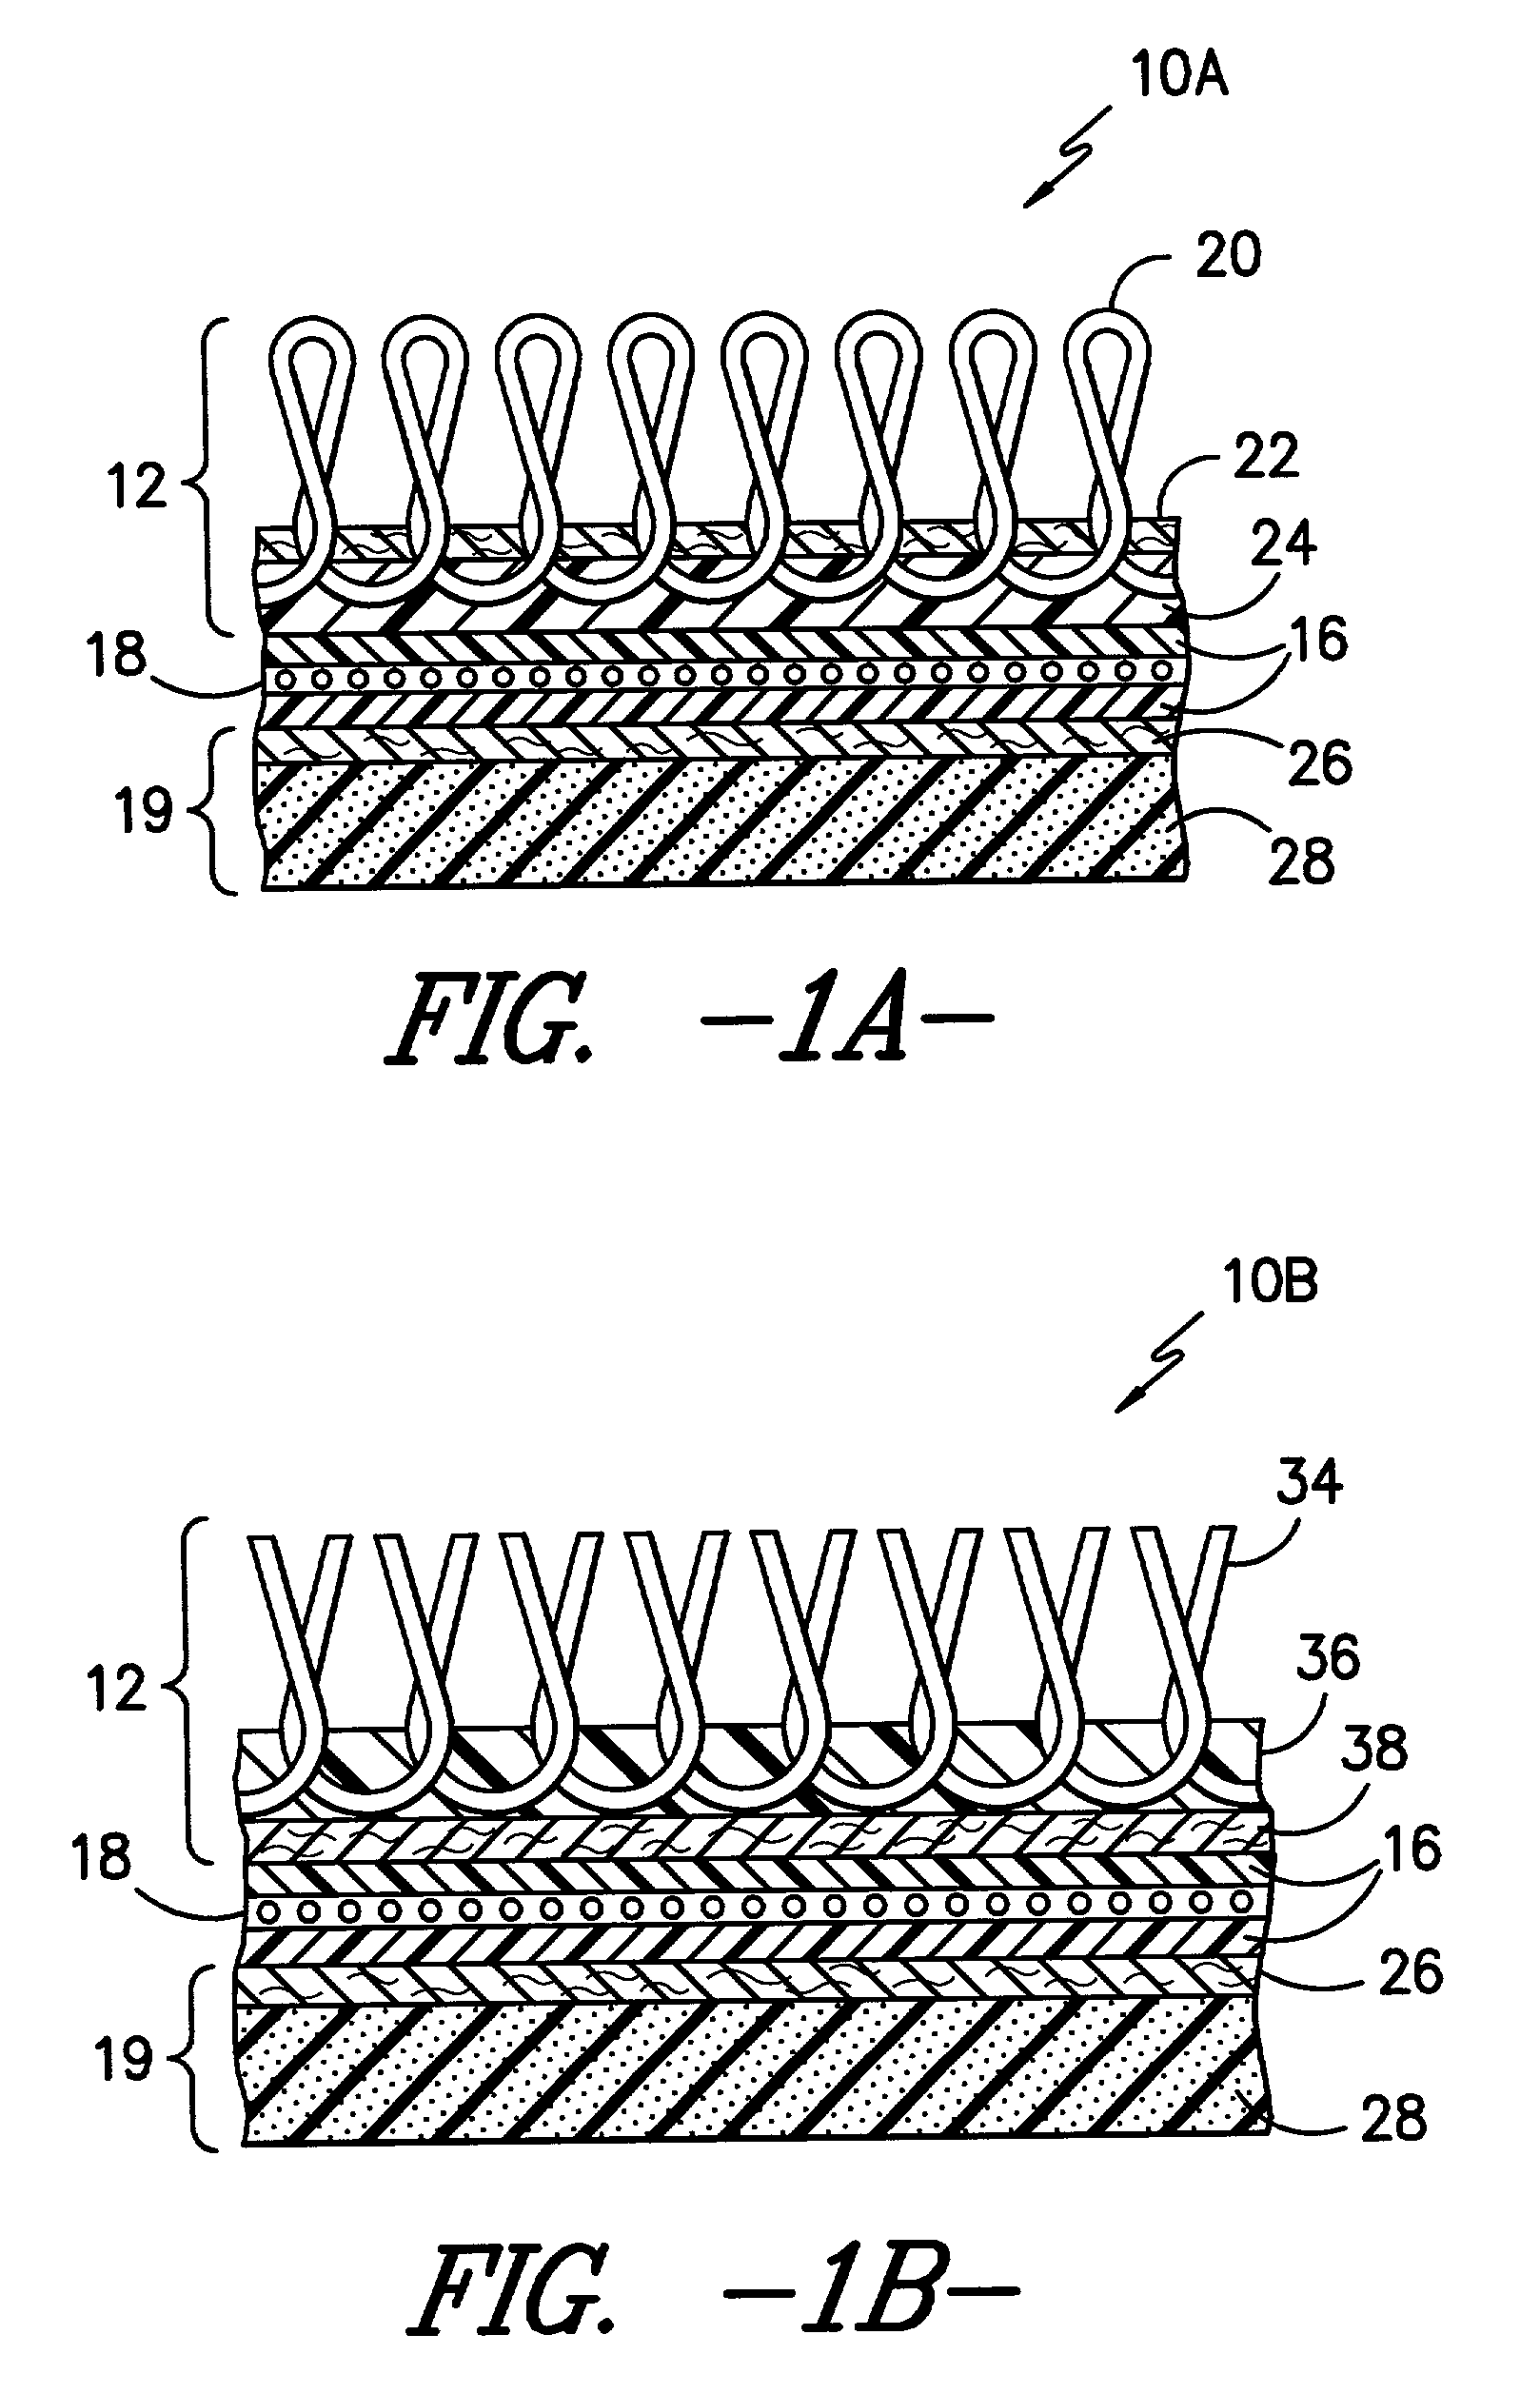 Residential carpet product and method